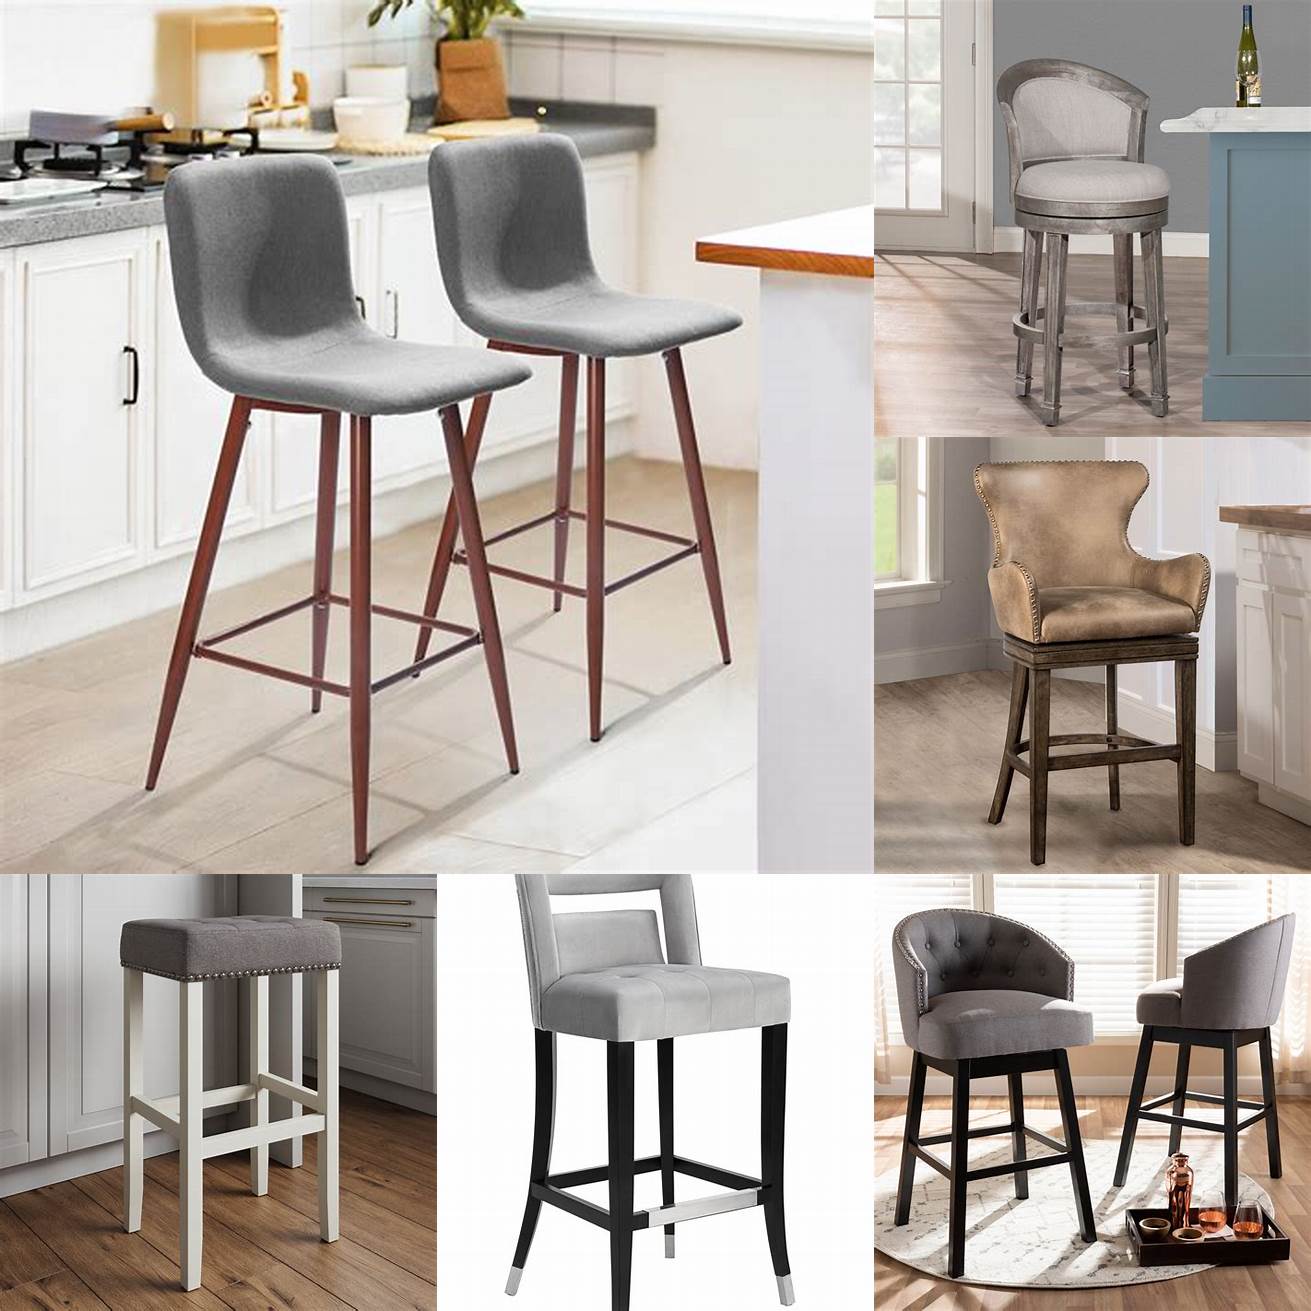 Grey barstools with natural wood accents